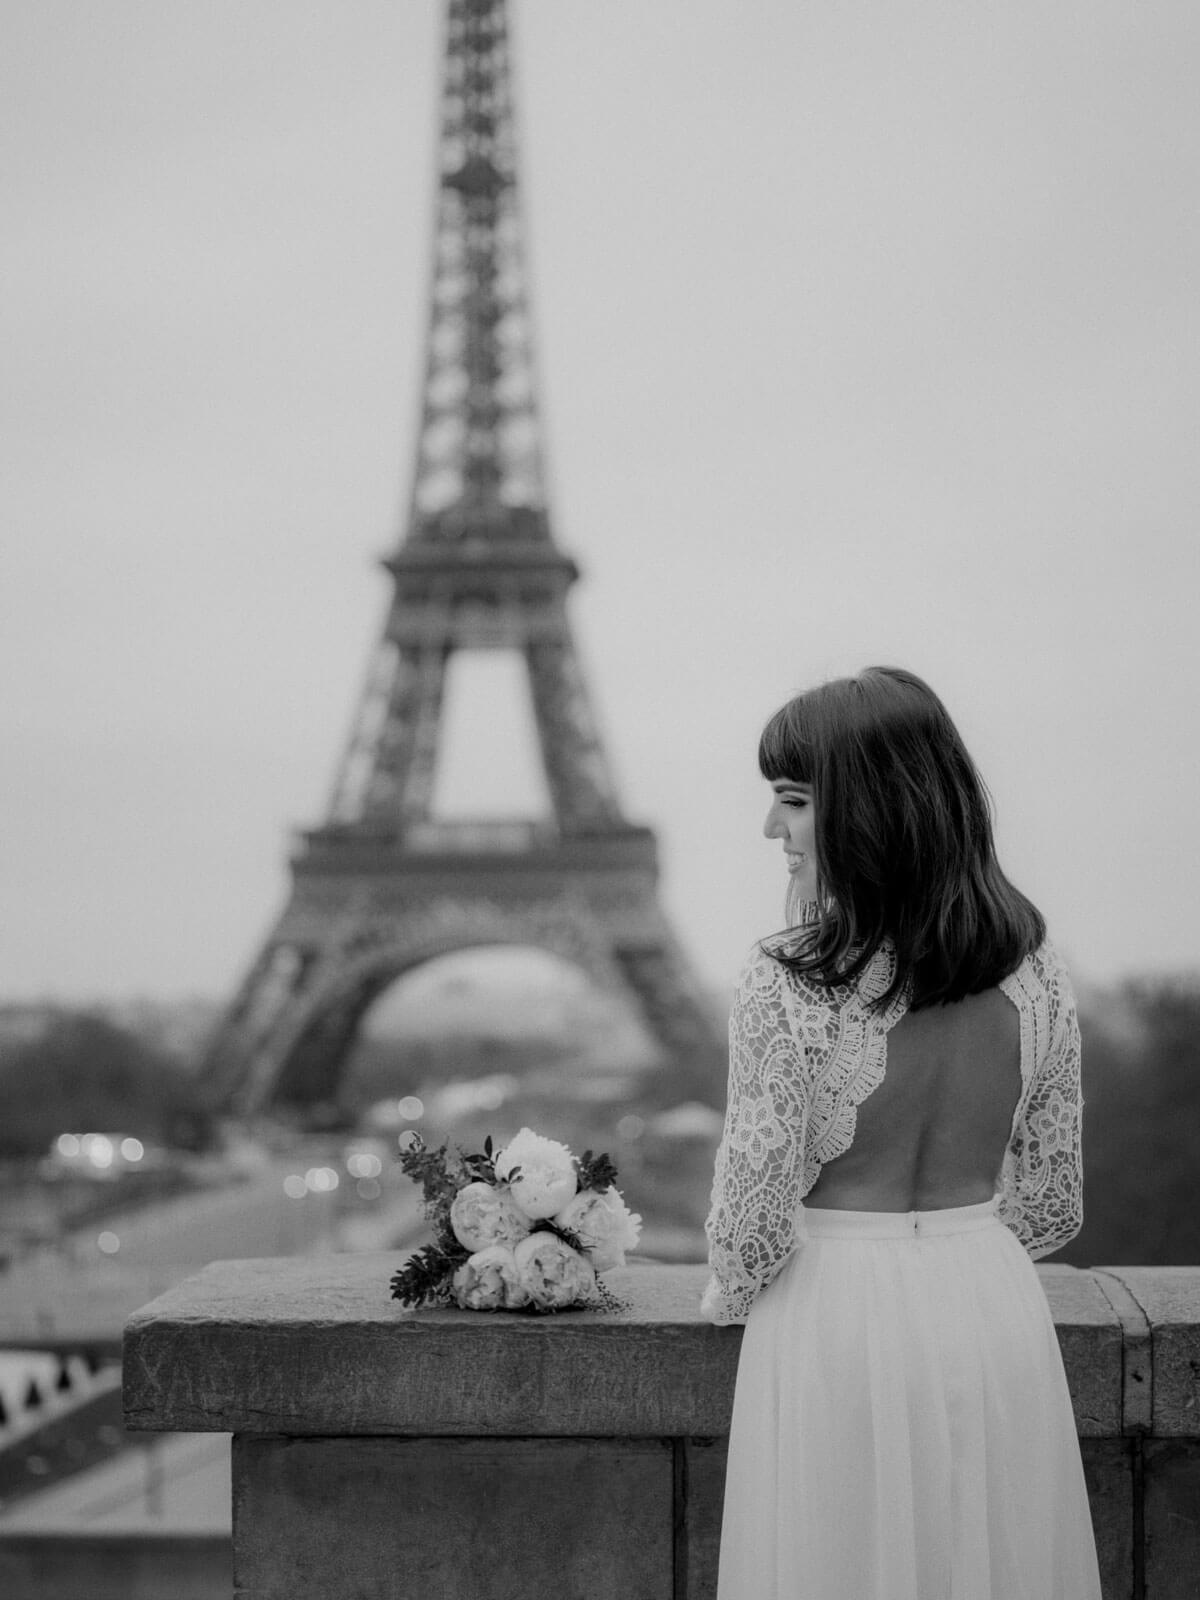 The bride is standing on a terrace overlooking the Eiffel Tower. Destination wedding image by Jenny Fu Studio